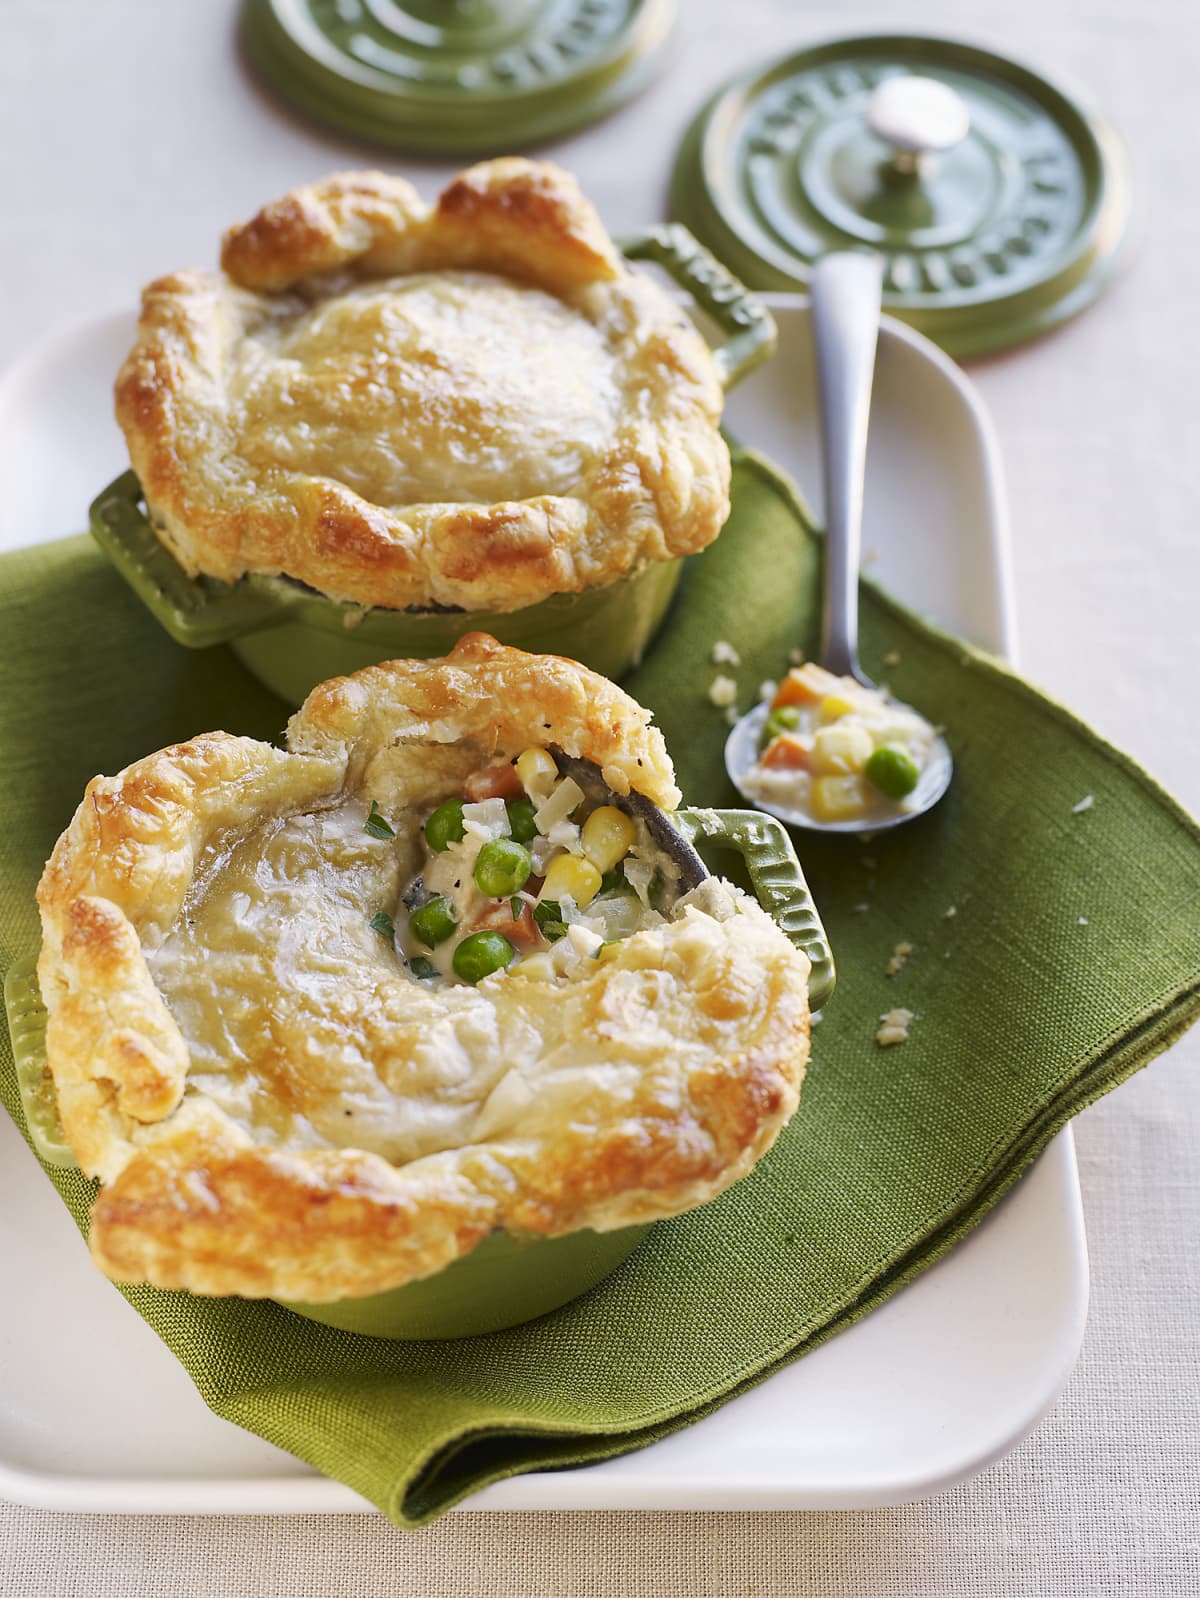 Chicken pot Pies with Puff Pastry - Photographed on Hasselblad H3D2-39mb Camera